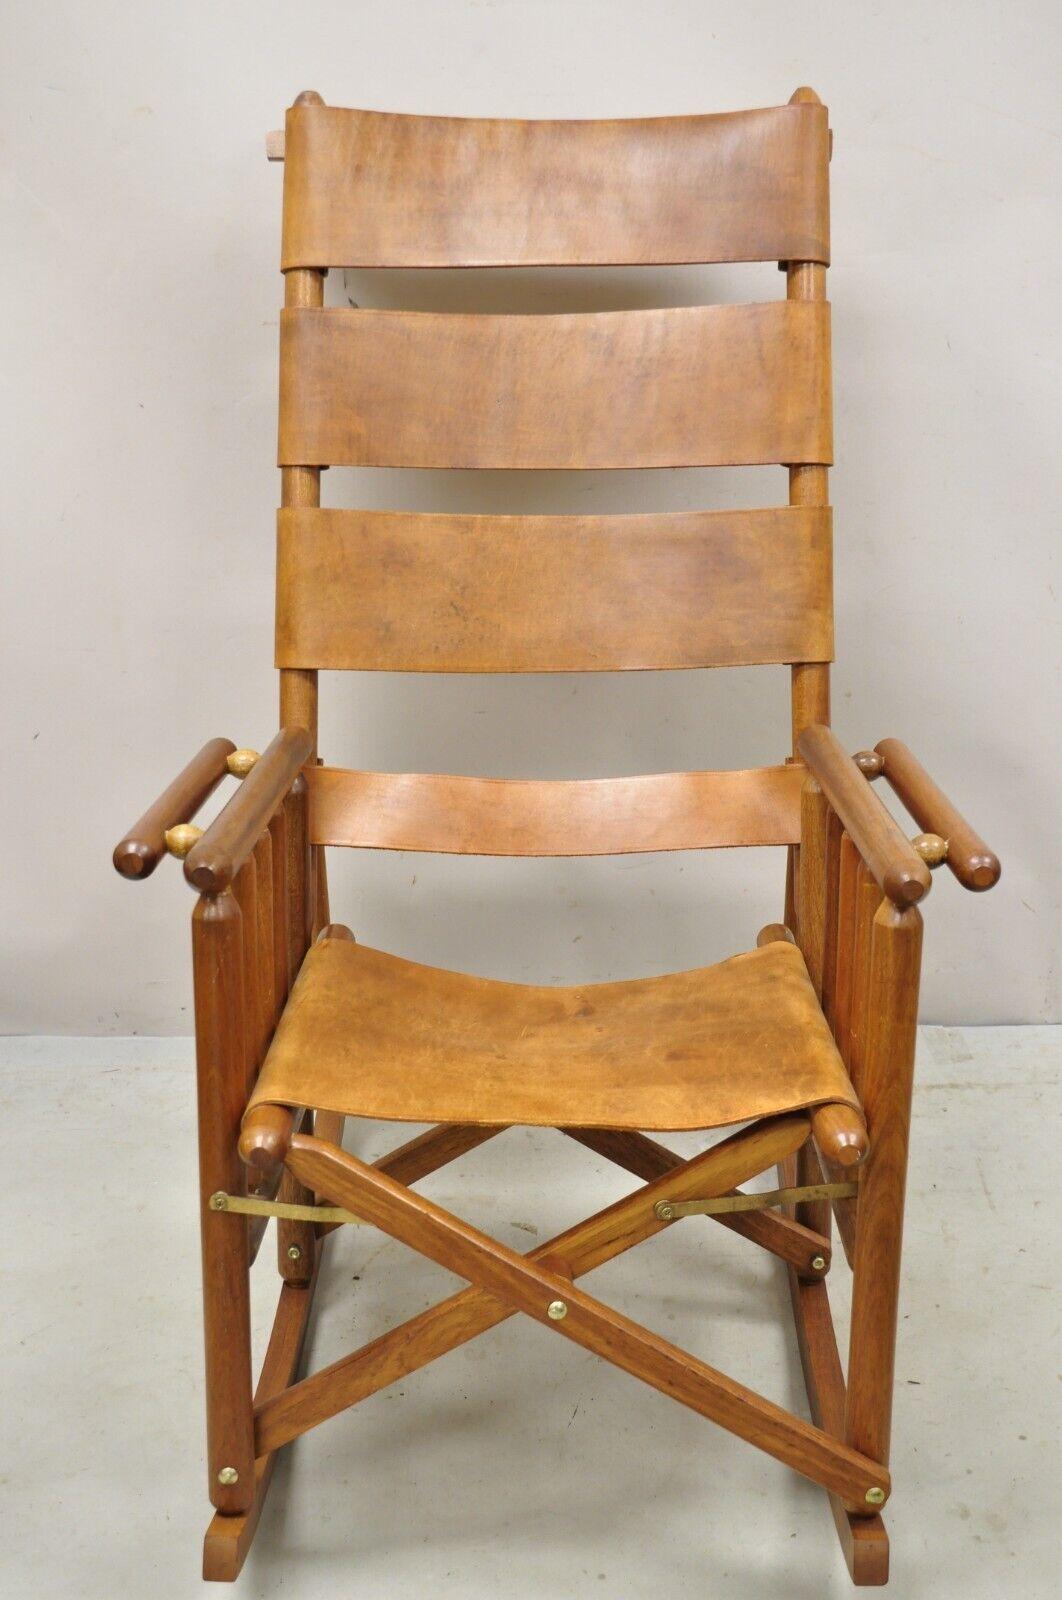 Costa Rican Campaign Style teak brown leather folding rocker rocking chair. Item features hick brown leather straps, solid teak wood folding frame, original stamp, very nice vintage item, quality craftsmanship, great style and form. Circa Mid to